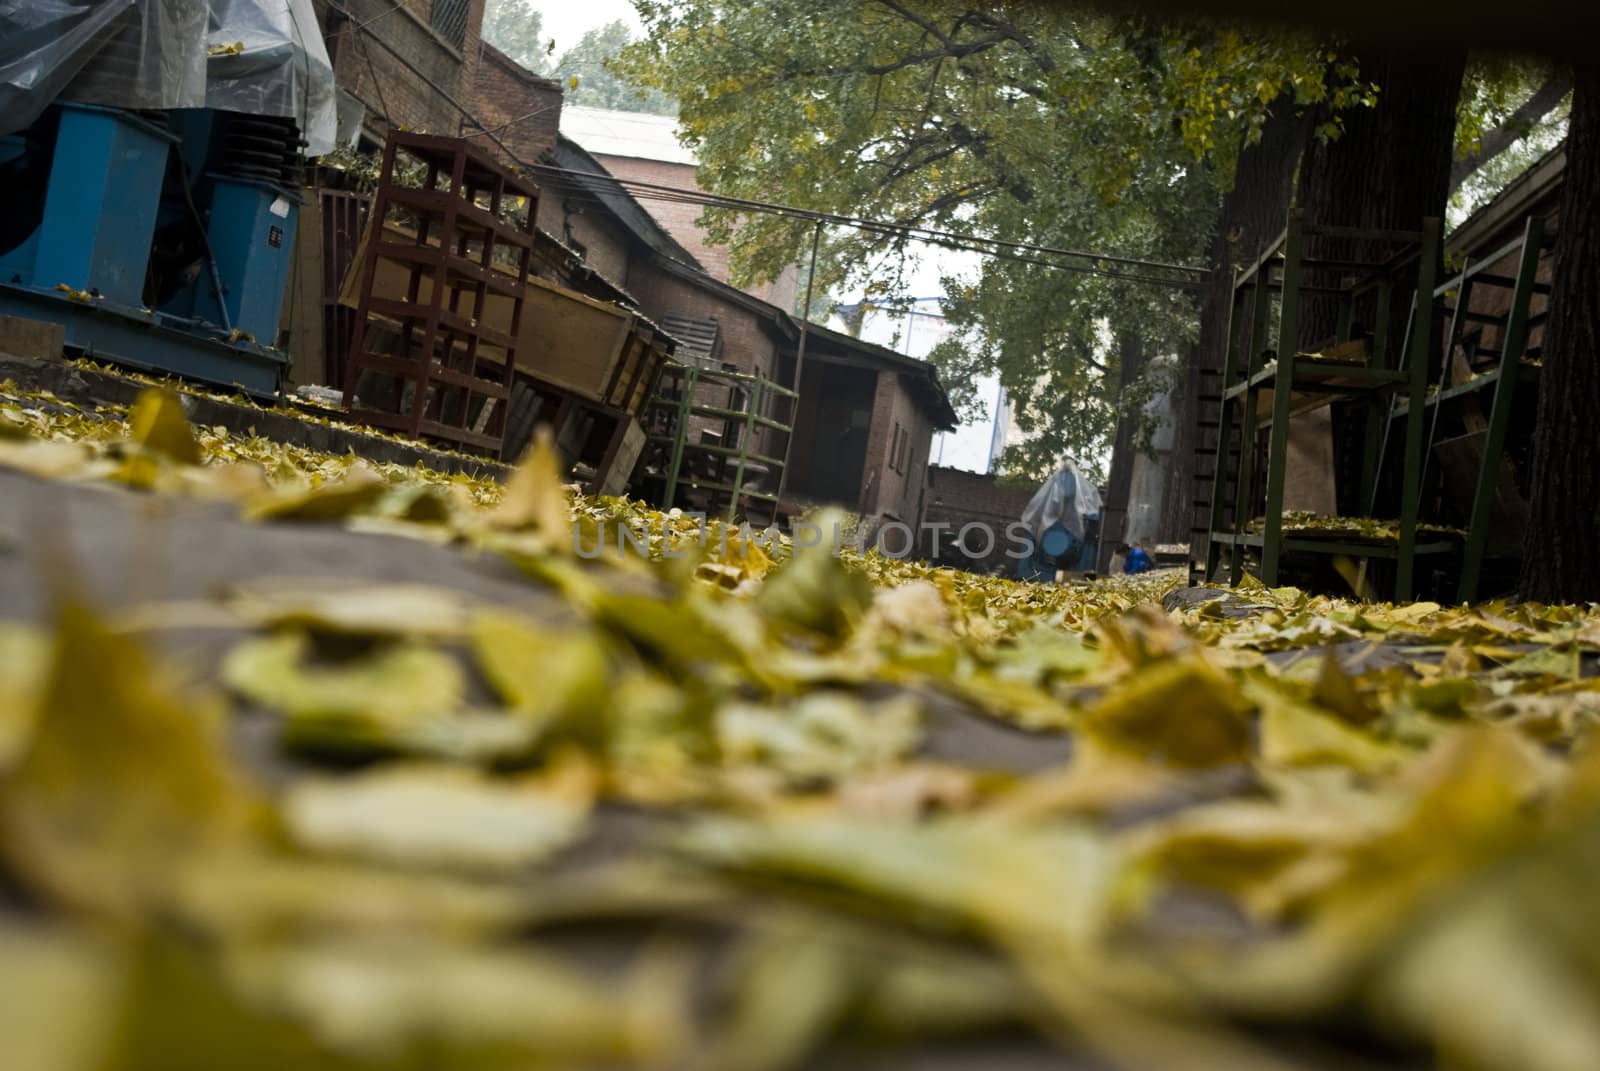 It is a road full of yellow leaf